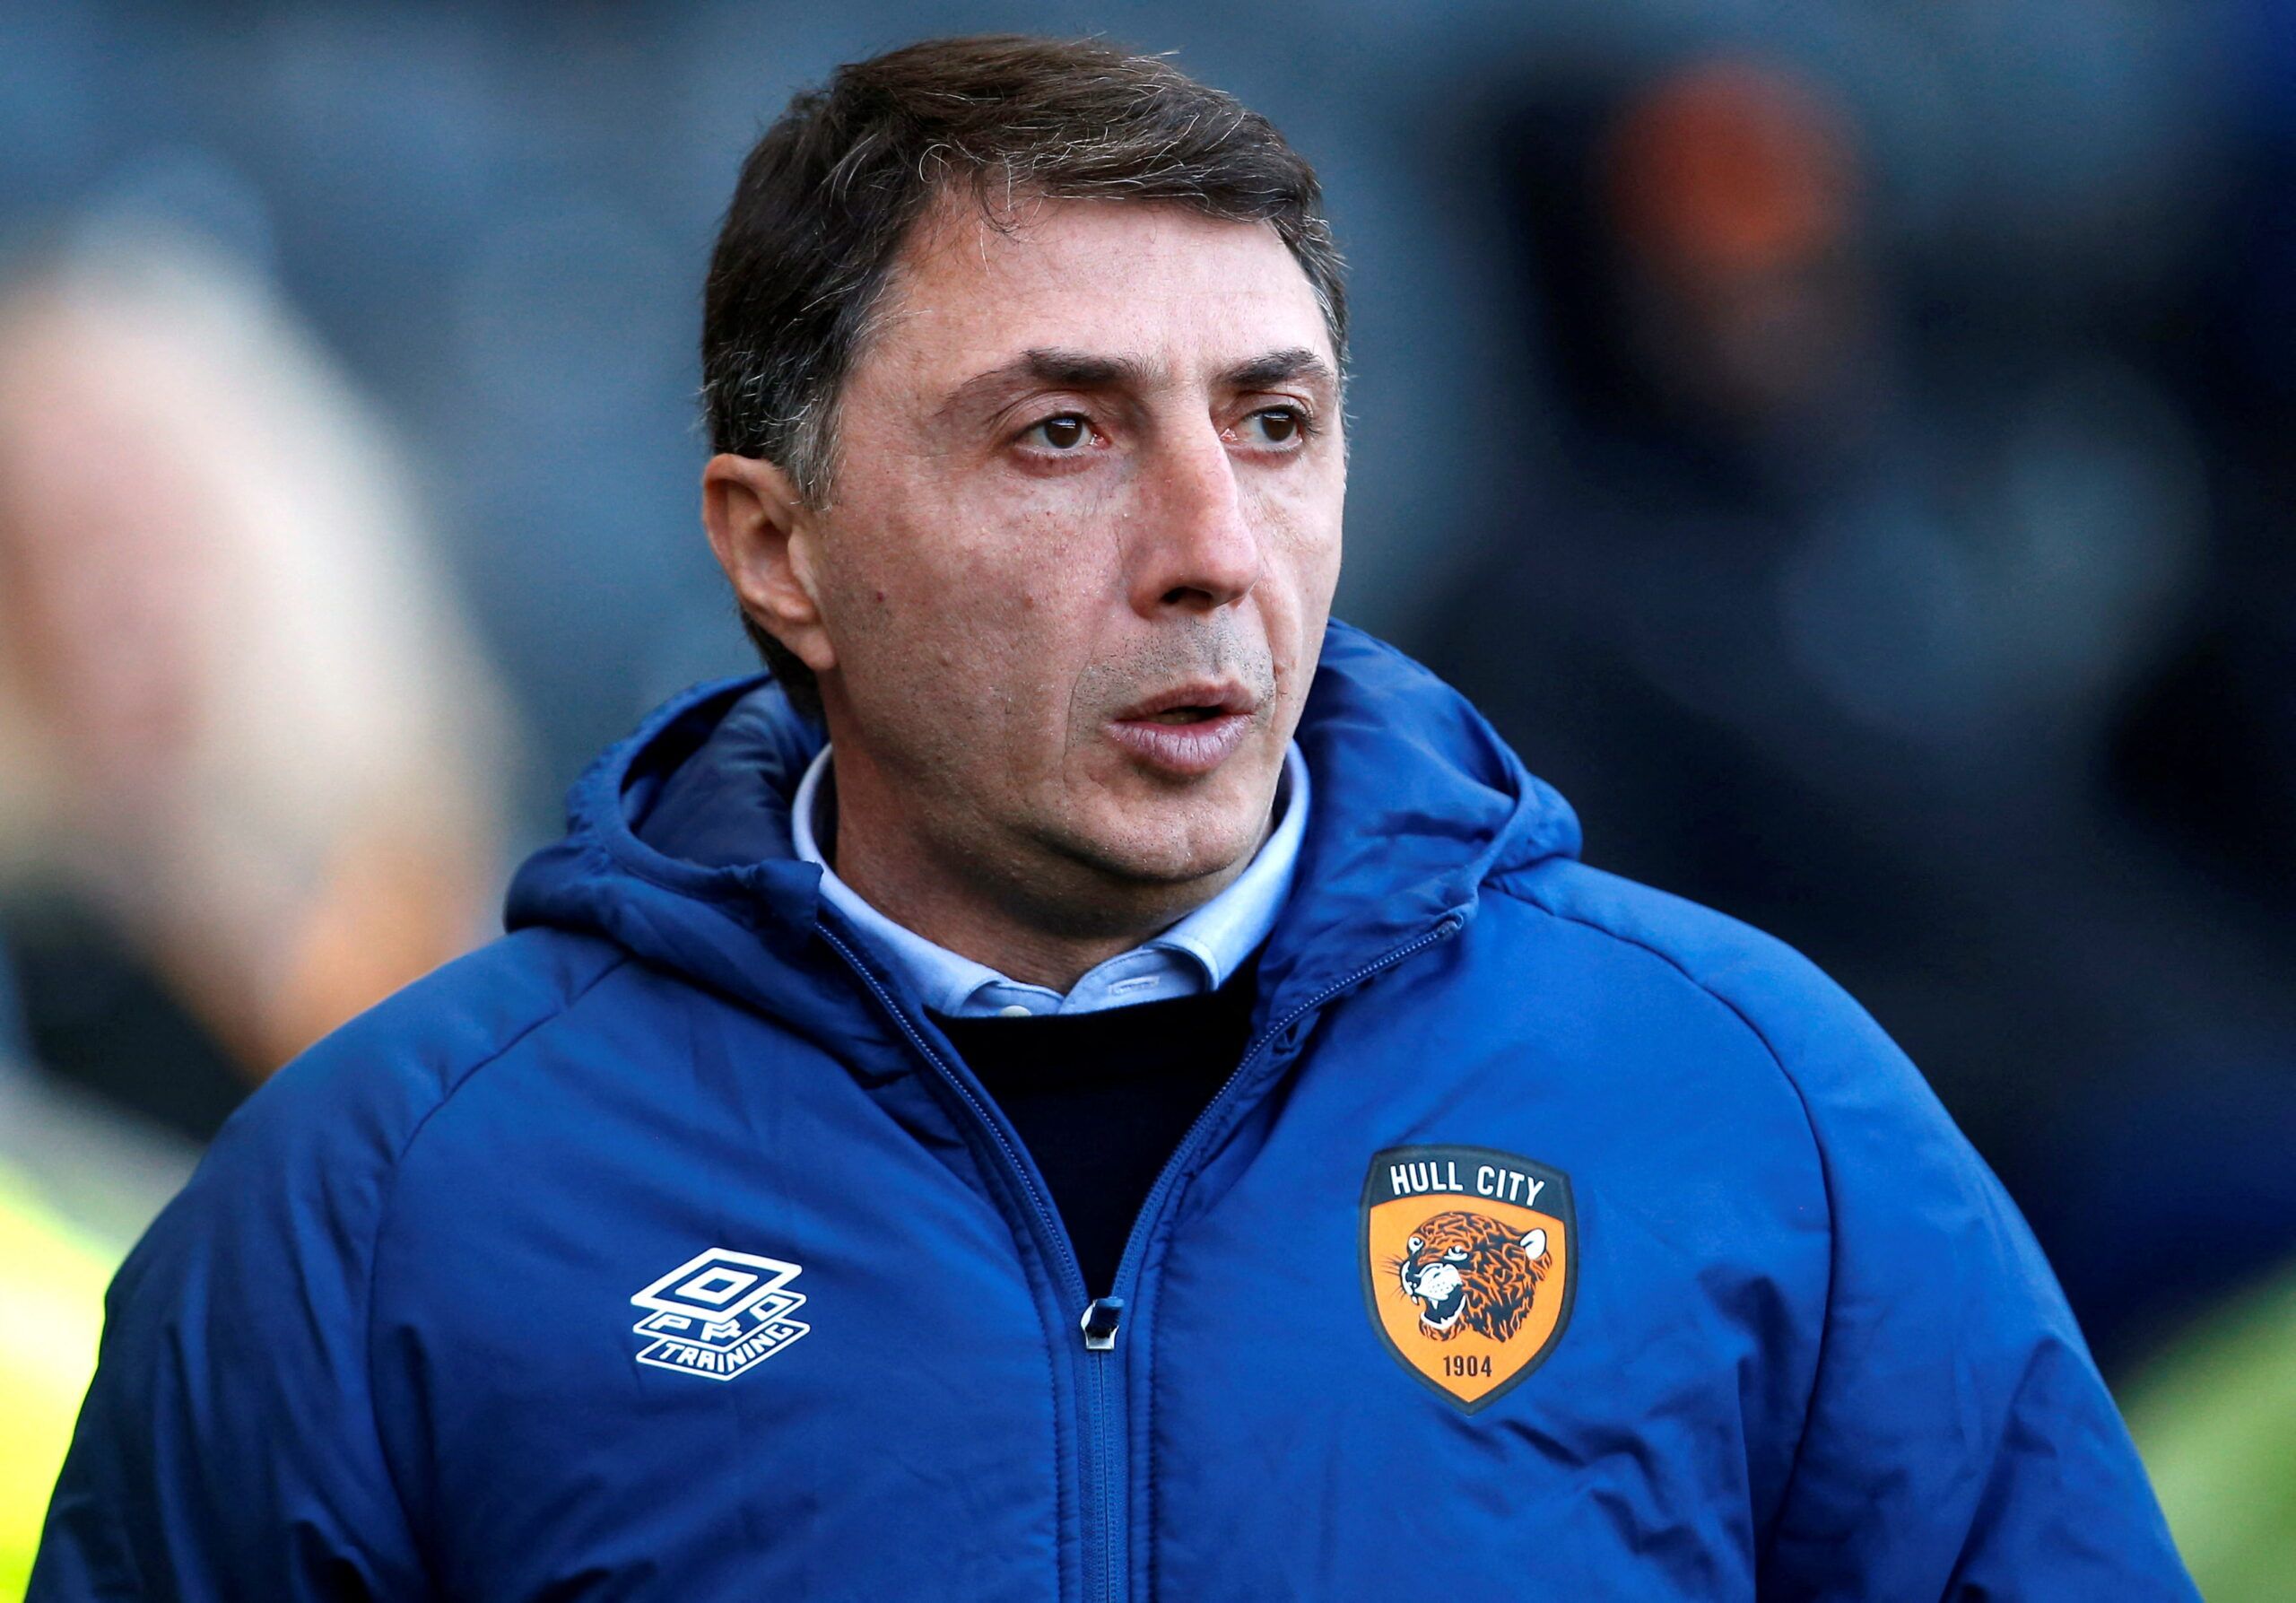 Soccer Football - Championship - Hull City v Luton Town - MKM Stadium, Hull, Britain - March 19, 2022 Hull City manager Shota Arveladze Action Images/Craig Brough  EDITORIAL USE ONLY. No use with unauthorized audio, video, data, fixture lists, club/league logos or 